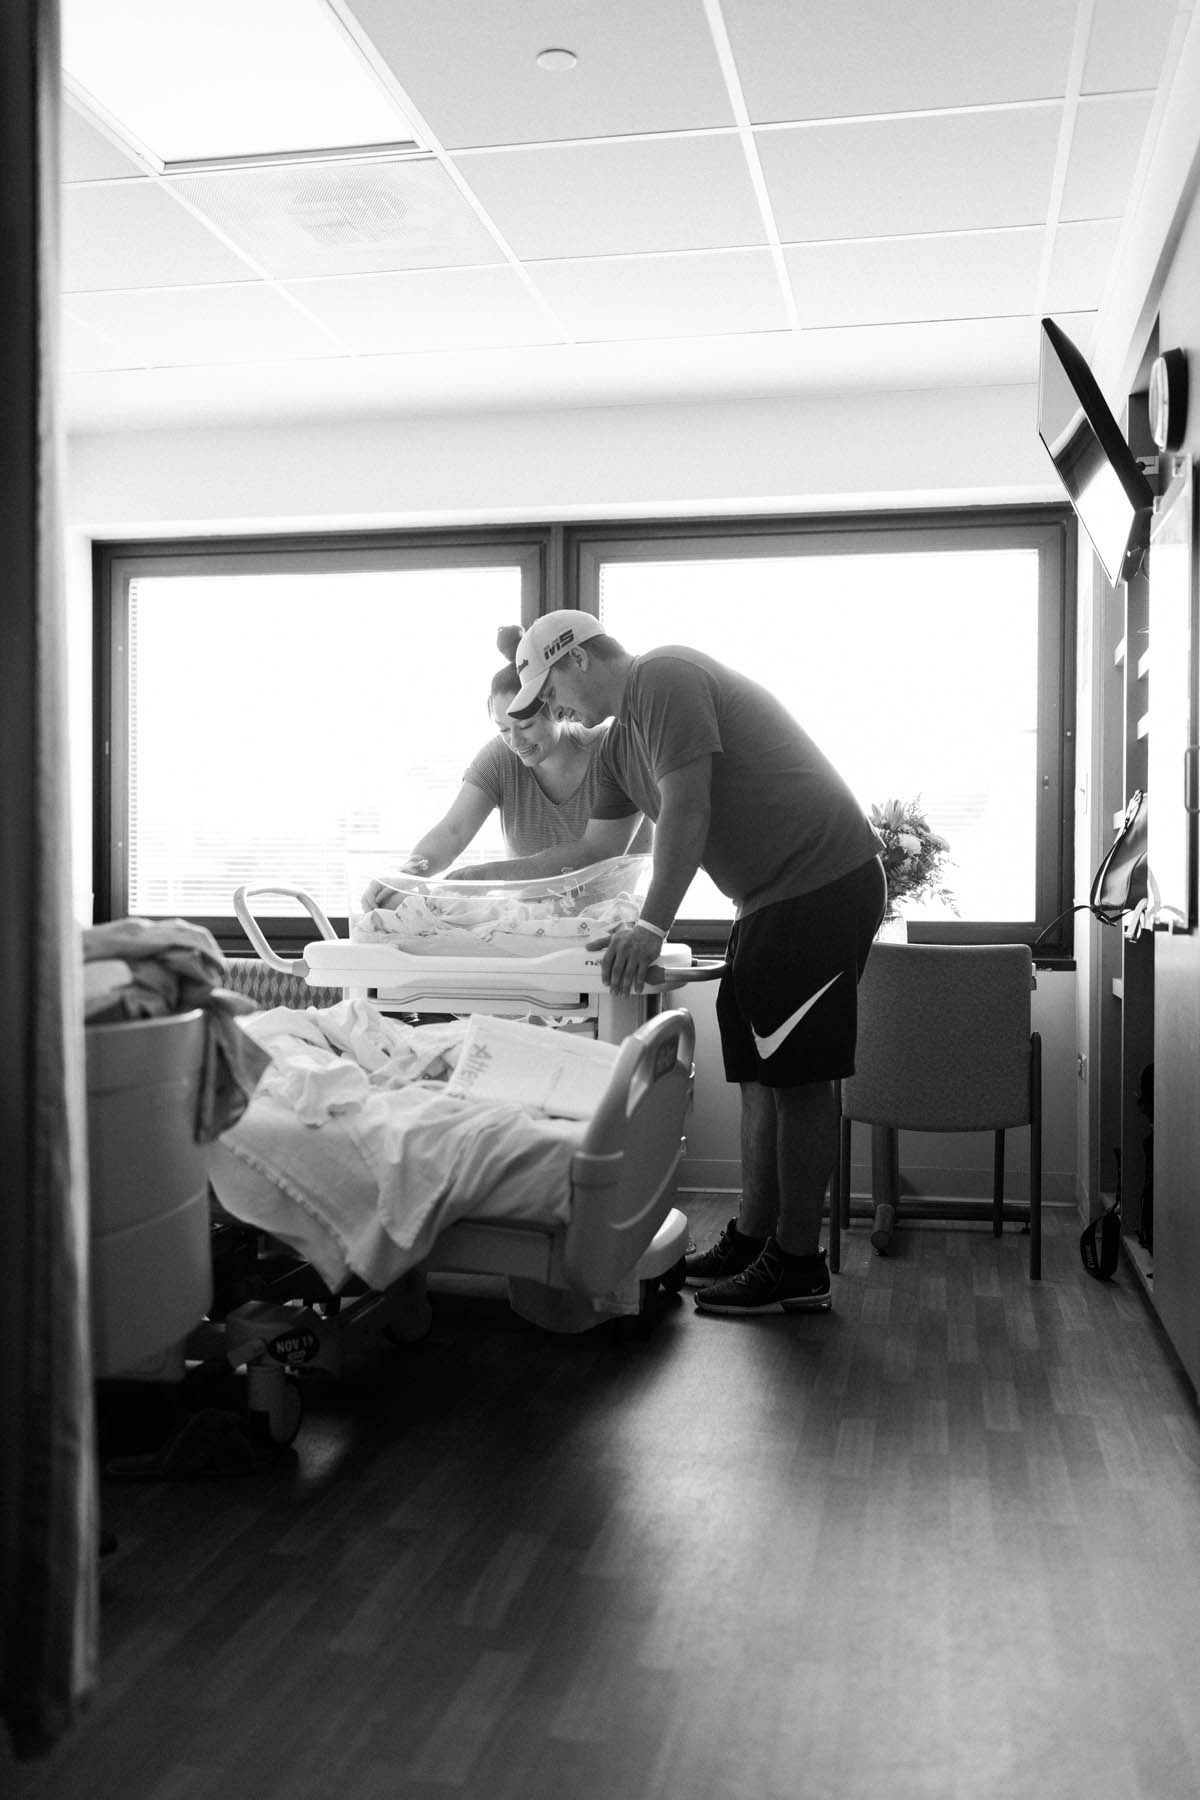 a peek inside of a hospital room where mom and dad are gazing at their newborn baby boy